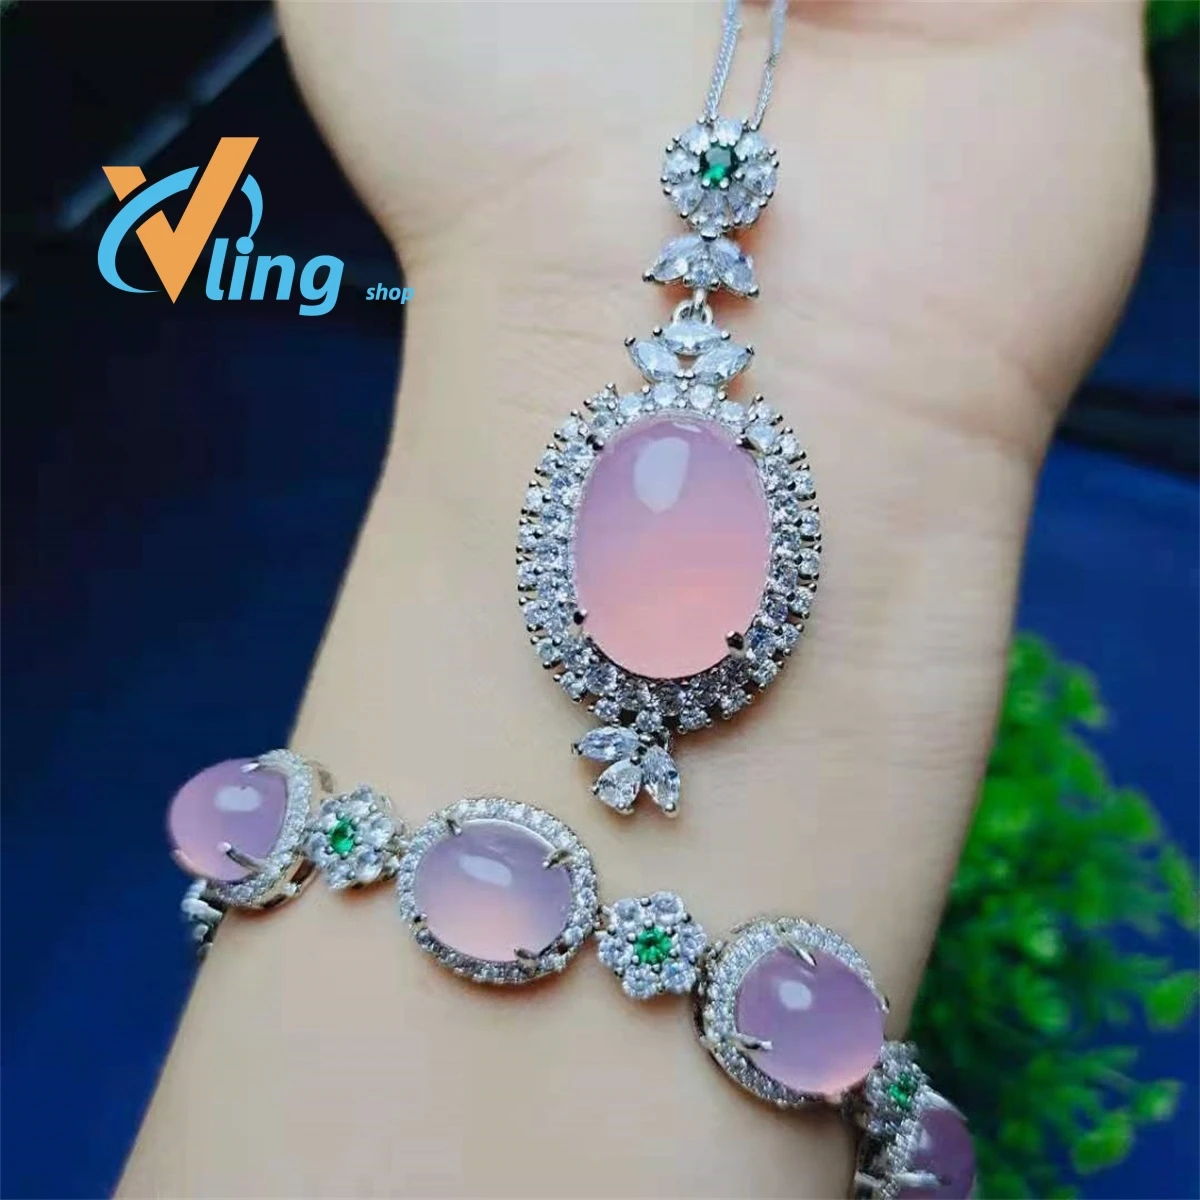 

S925 Silver Inlaid Ice Powder Chalcedony Pendant Bracelet Two Piece Set of Exquisite Women's Set Gift